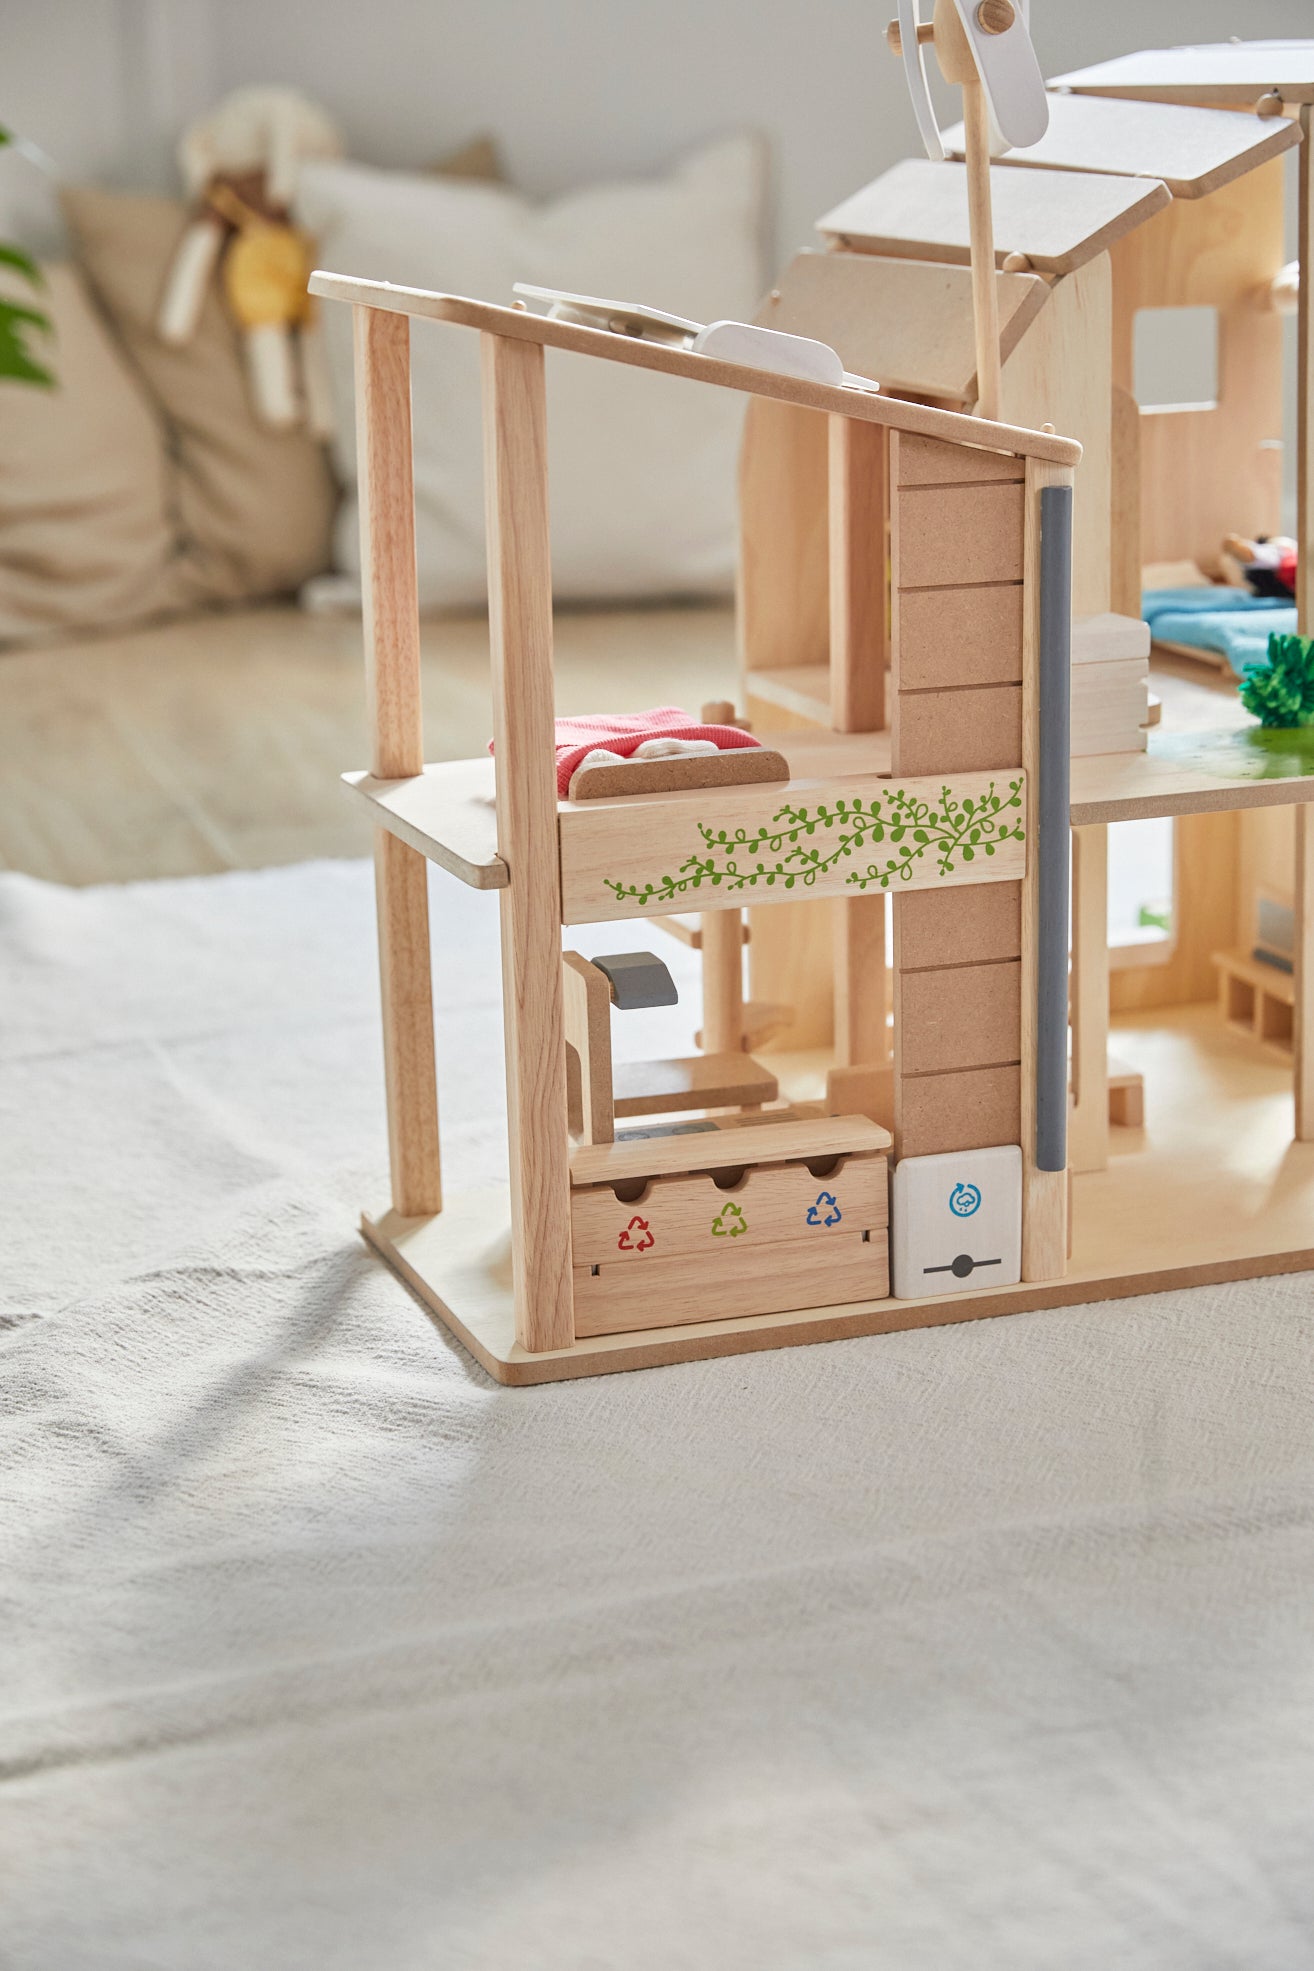 PlanToys - Green Dollhouse with Furniture